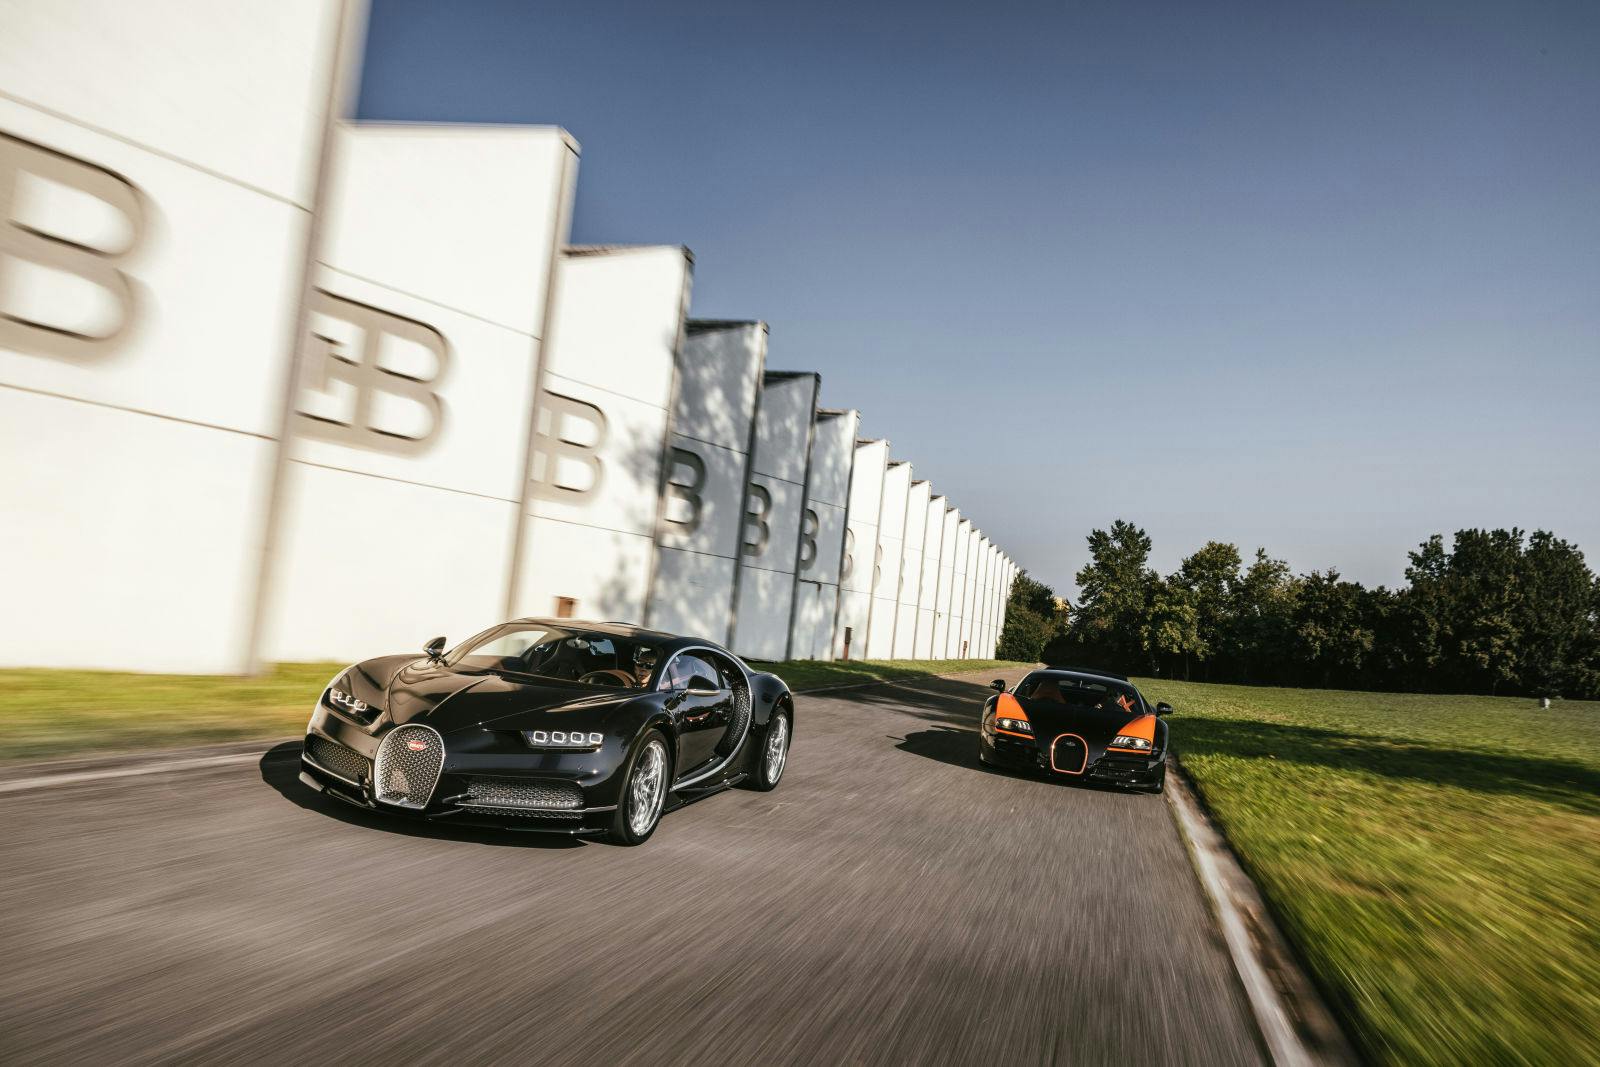 The Anniversary Tour begins: with the Veyron 16.4 Grand Sport Vitesse and the Chiron Sport from Campogalliano, Italy to Molsheim, France.